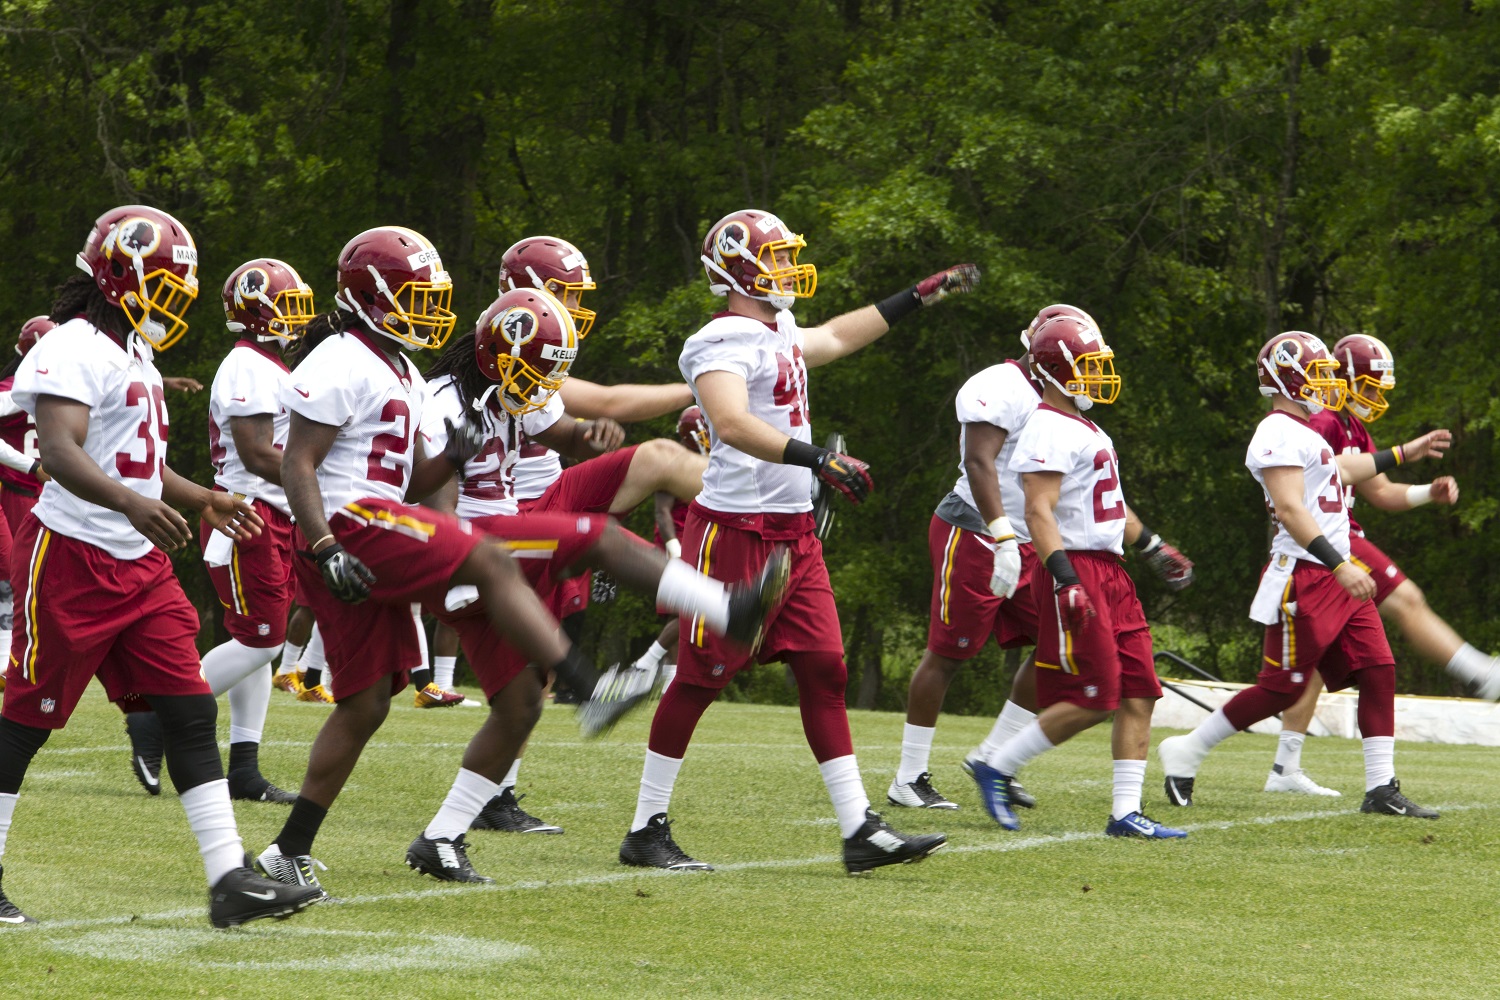 Offseason workouts continue at Redskins Park with Organized Team Activities